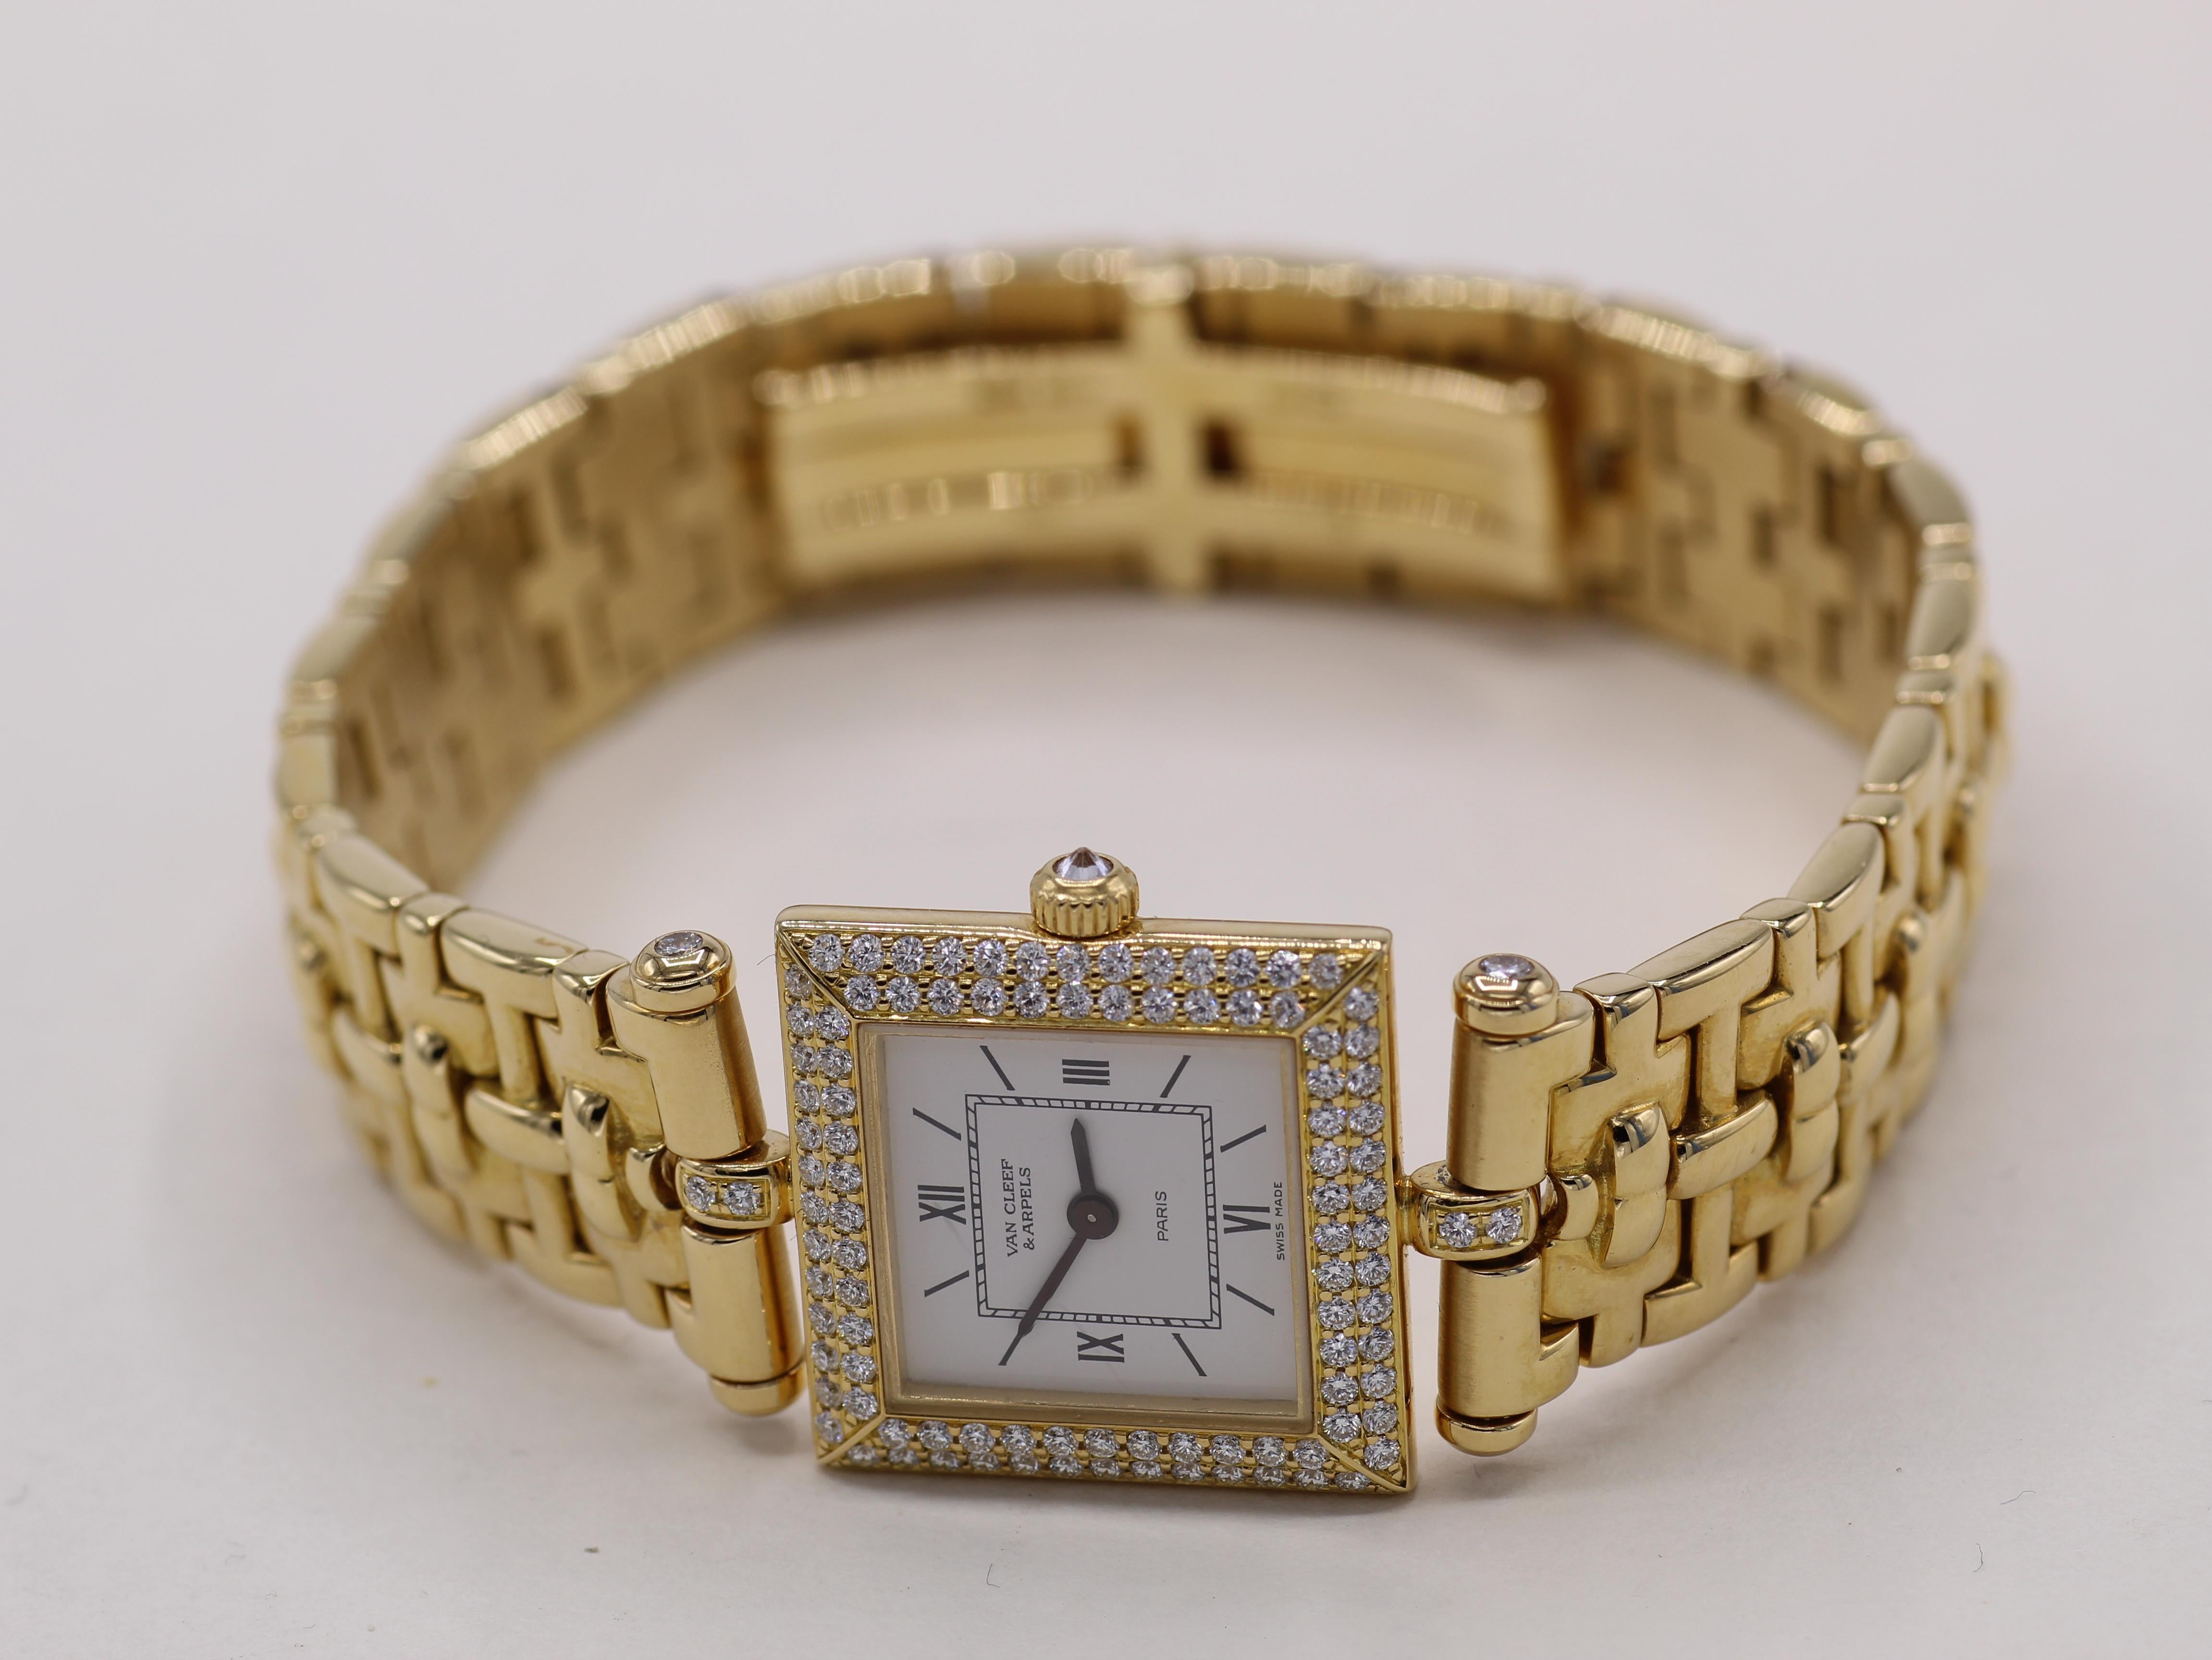 Van Cleef & Arpels 18 Karat gold ladies wristwatch with a quartz movement, square enamel dial with Roman numerals at 12,3,6 and 9. Bordered by a slanted bezel pave set with 2 rows of round brilliant cut diamond and an upside down bezel set diamond